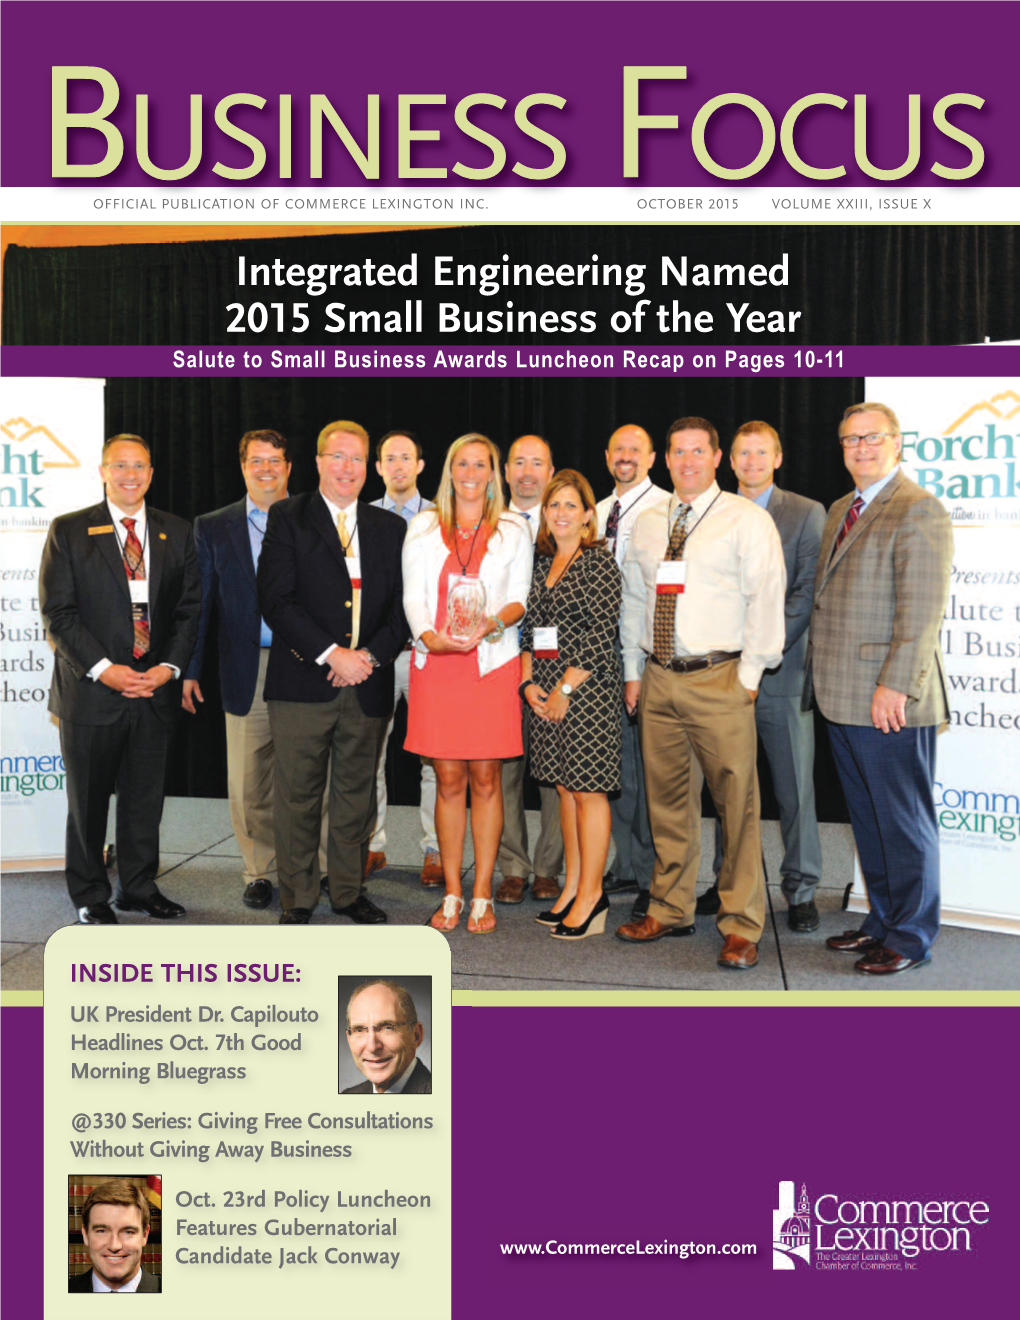 OCTOBER 2015 VOLUME XXIII, ISSUE X Integrated Engineering Named 2015 Small Business of the Year Salute to Small Business Awards Luncheon Recap on Pages 10-11